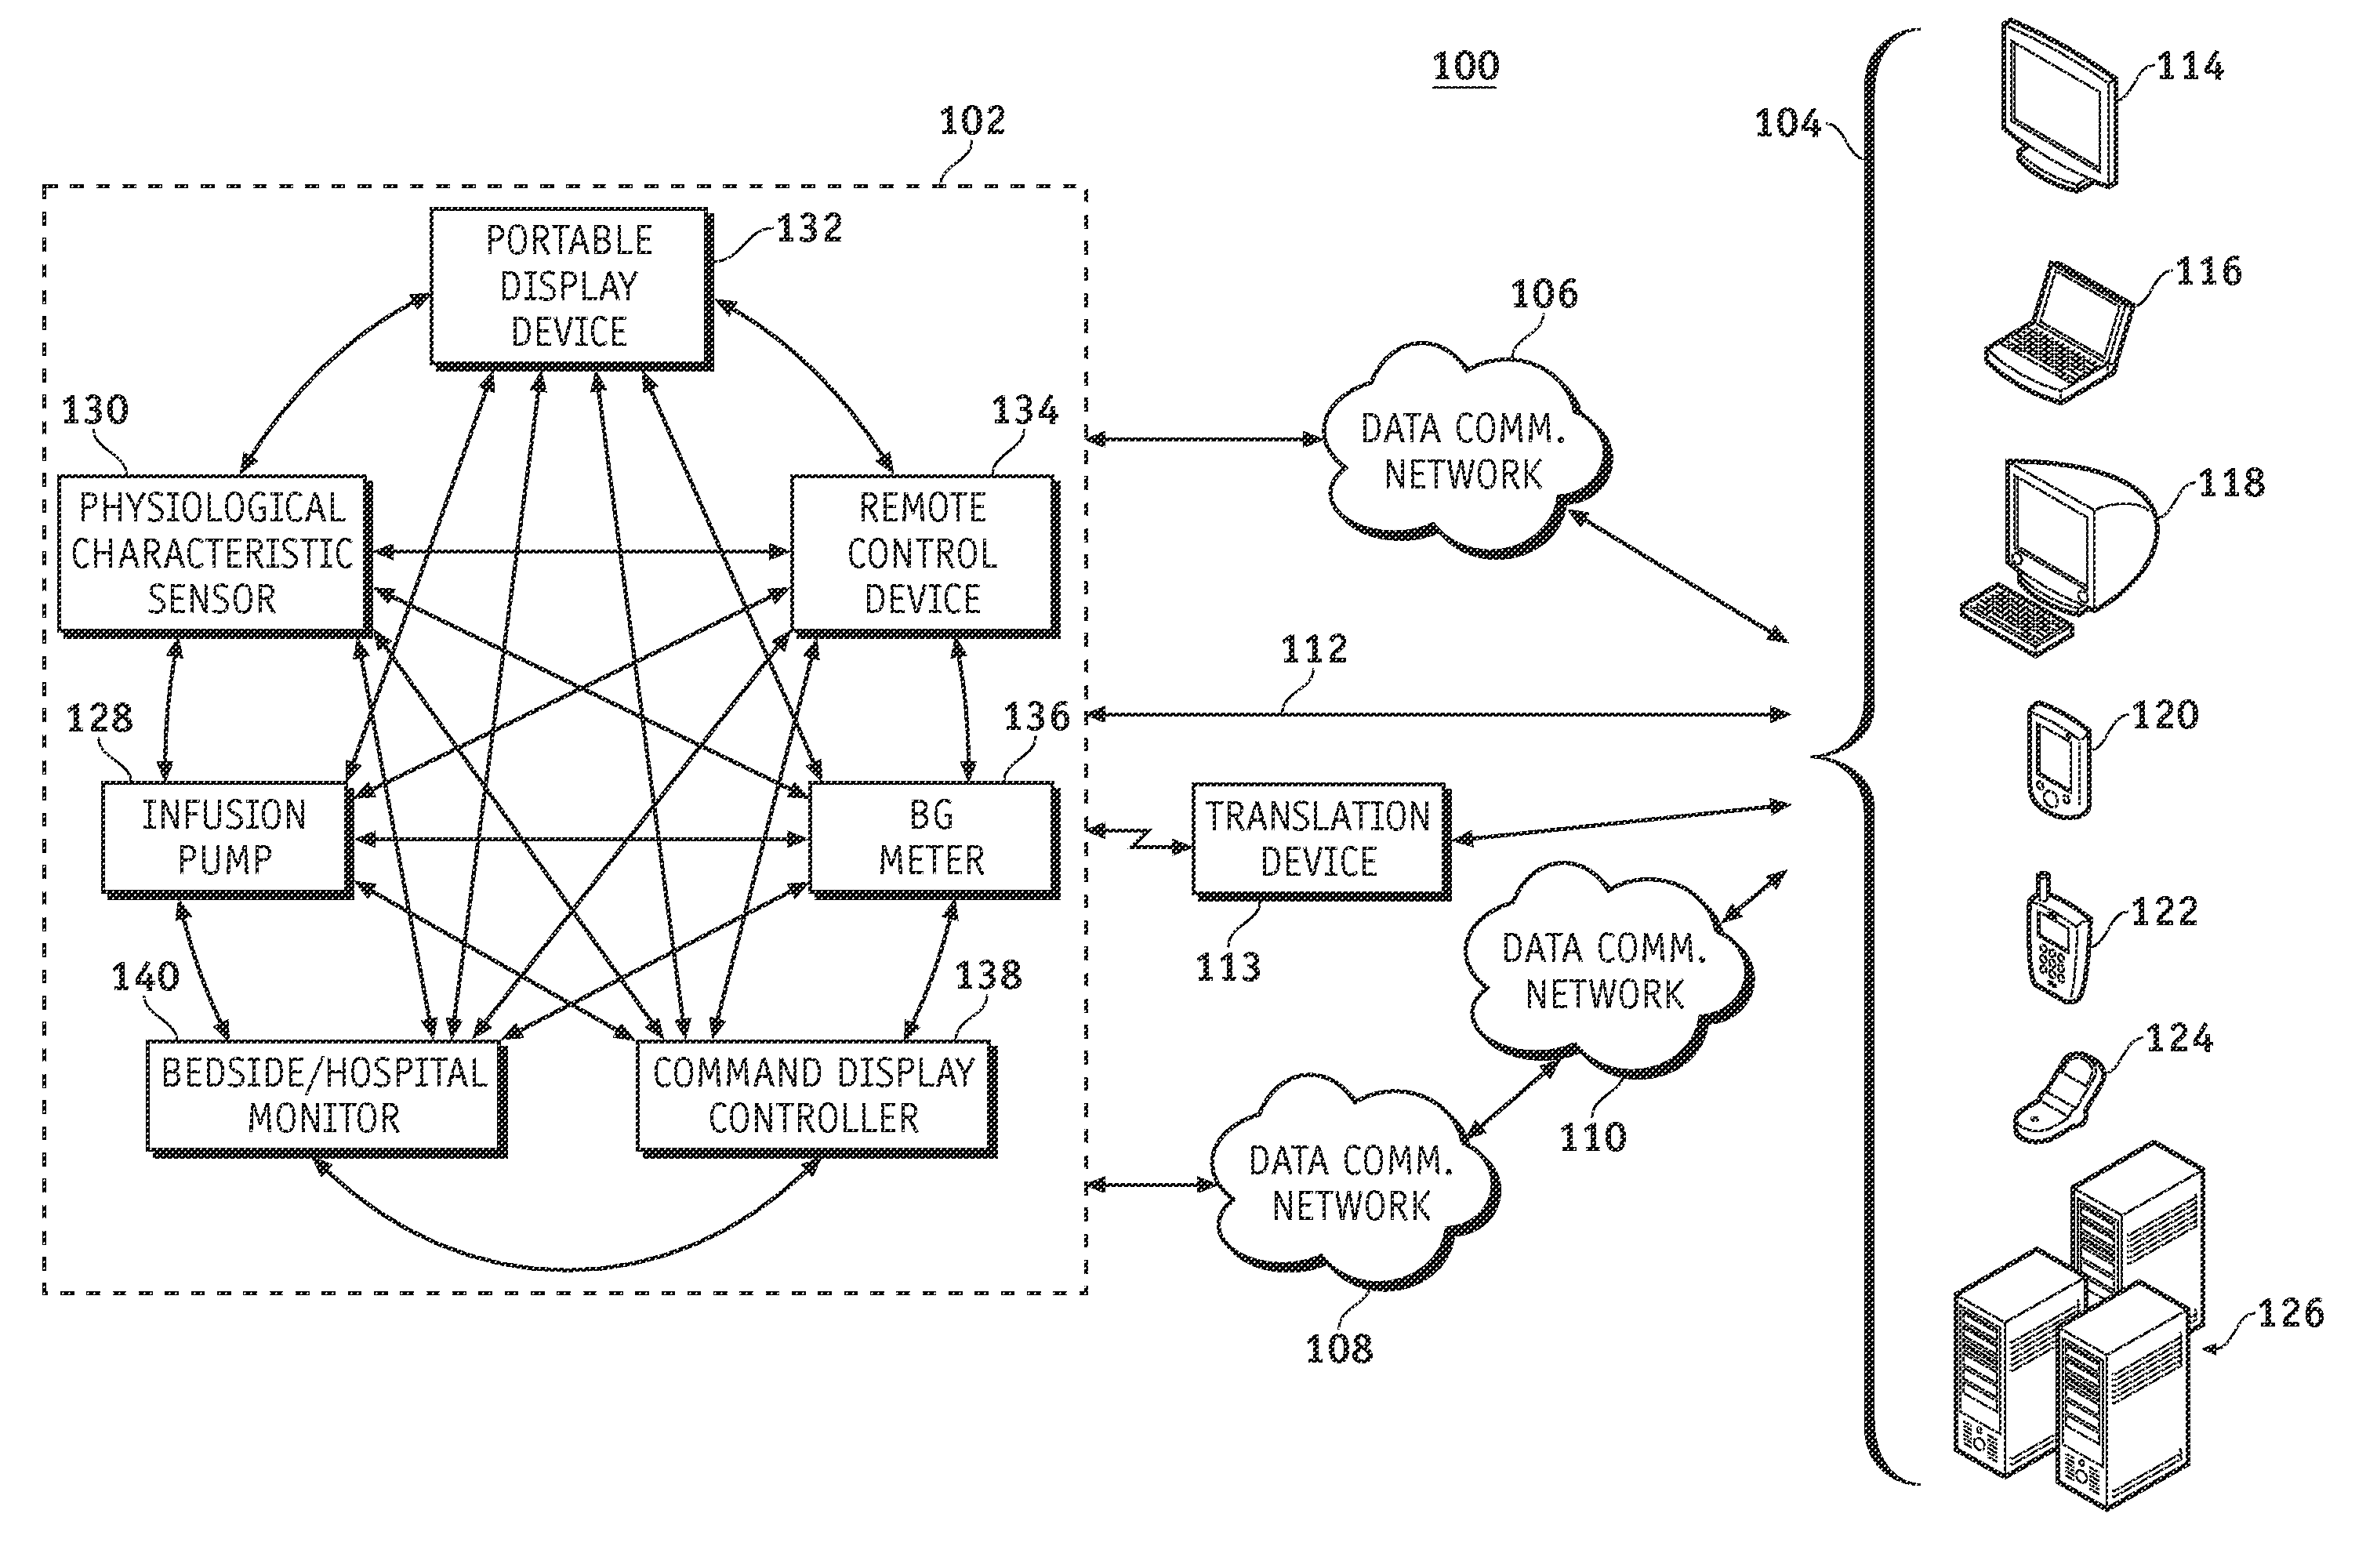 Identification of devices in a medical device network and wireless data communication techniques utilizing device identifiers